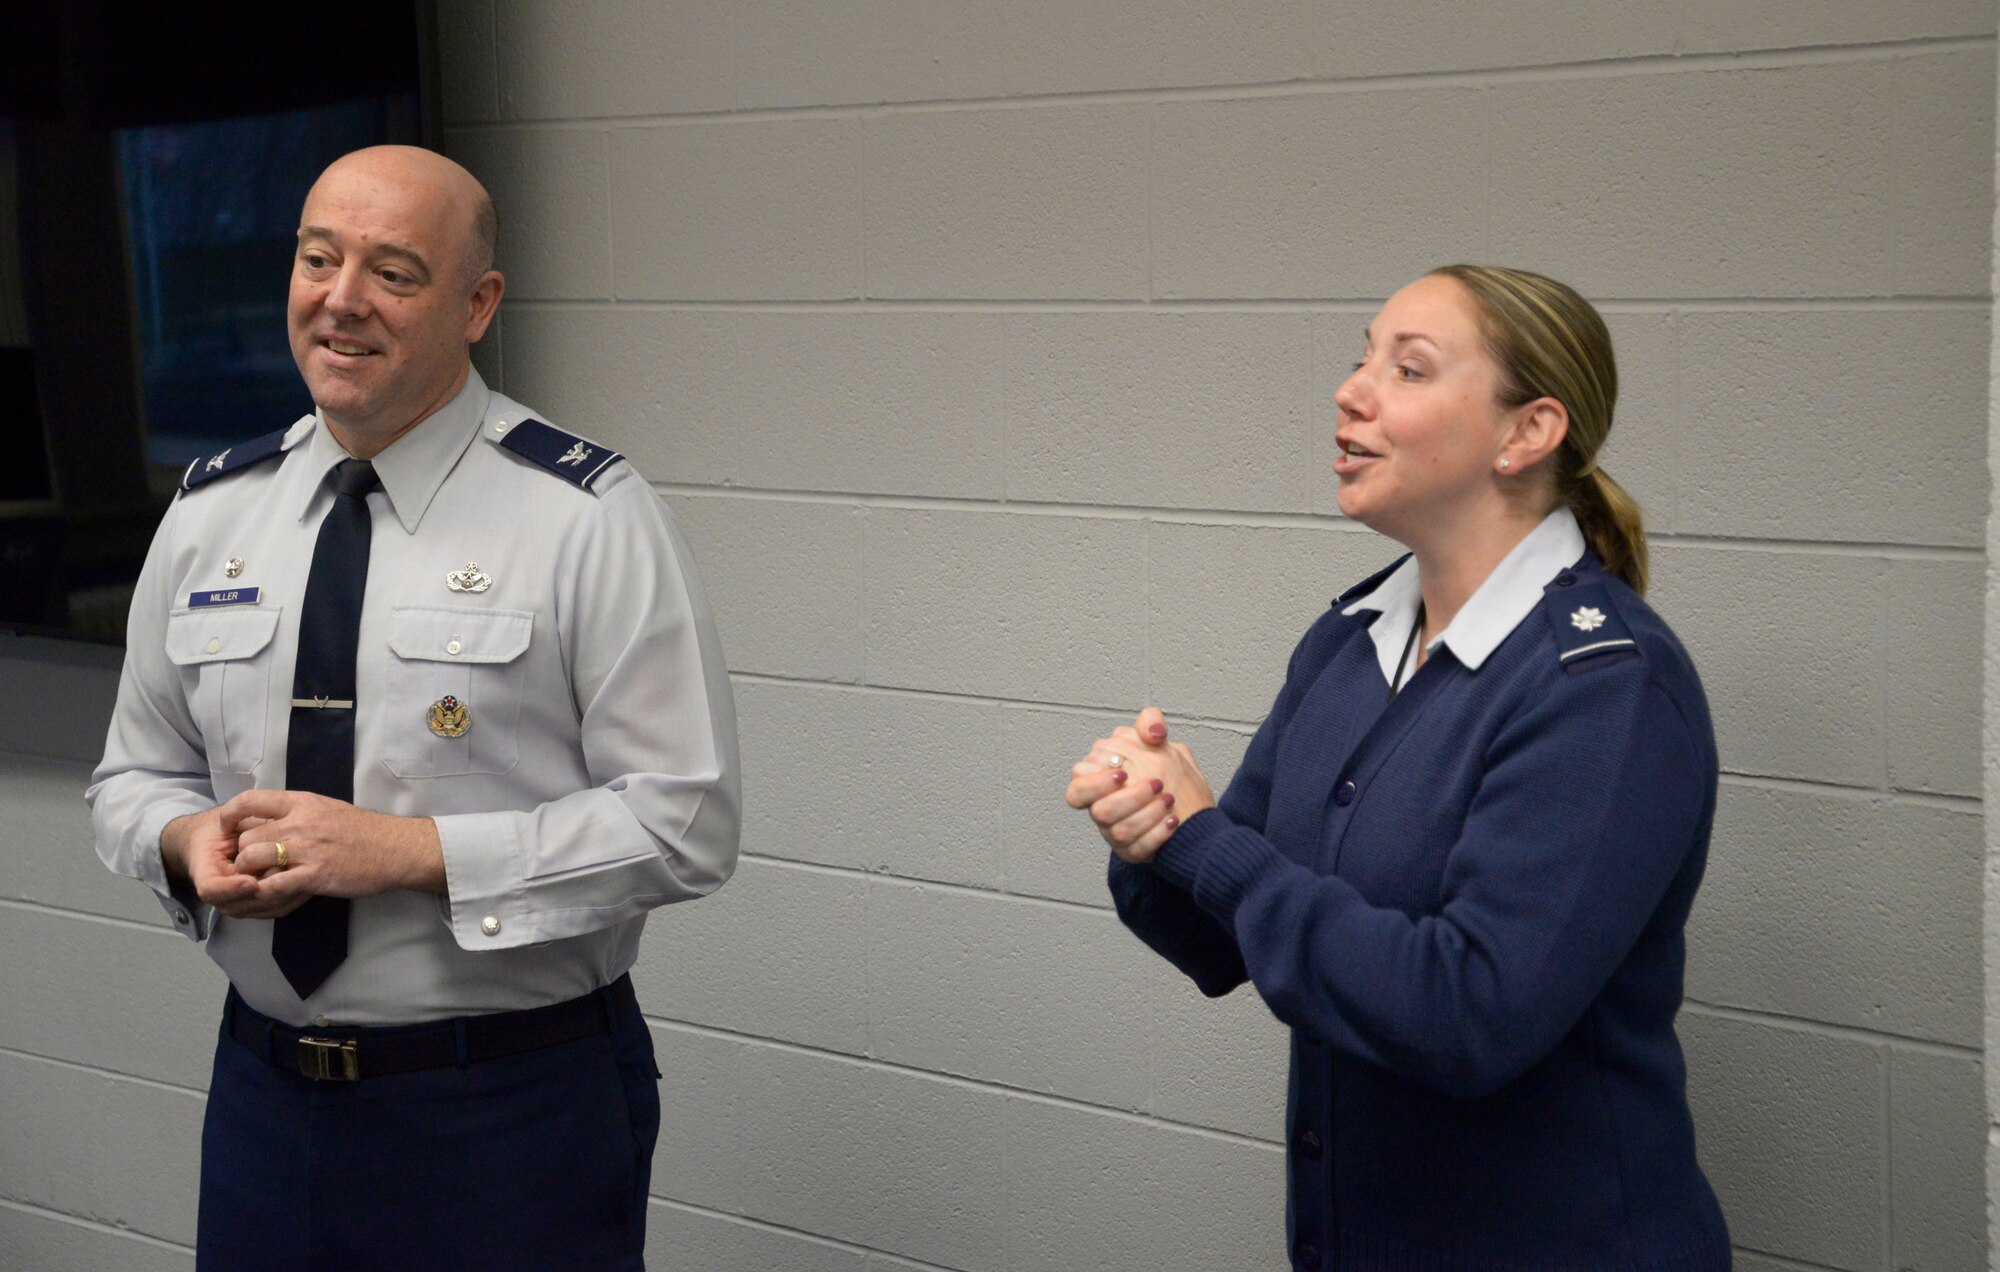 Col. Patrick Miller, 88th Air Base Wing and Wright-Patterson Air Force Base commander, and Lt Col. Emily Kubusek, Detachment 645 operations flight commander, inform the AFROTC cadets of their future military career and what they should expect pending graduation from the program April 14, 2022 at Ohio State University. College students interested in joining the Air Force or Space Force go through a four-year program which allow them to attend AFROTC classes along with other college courses to receive elective academic credit. (U.S. Air Force photo by Darrius Parker)